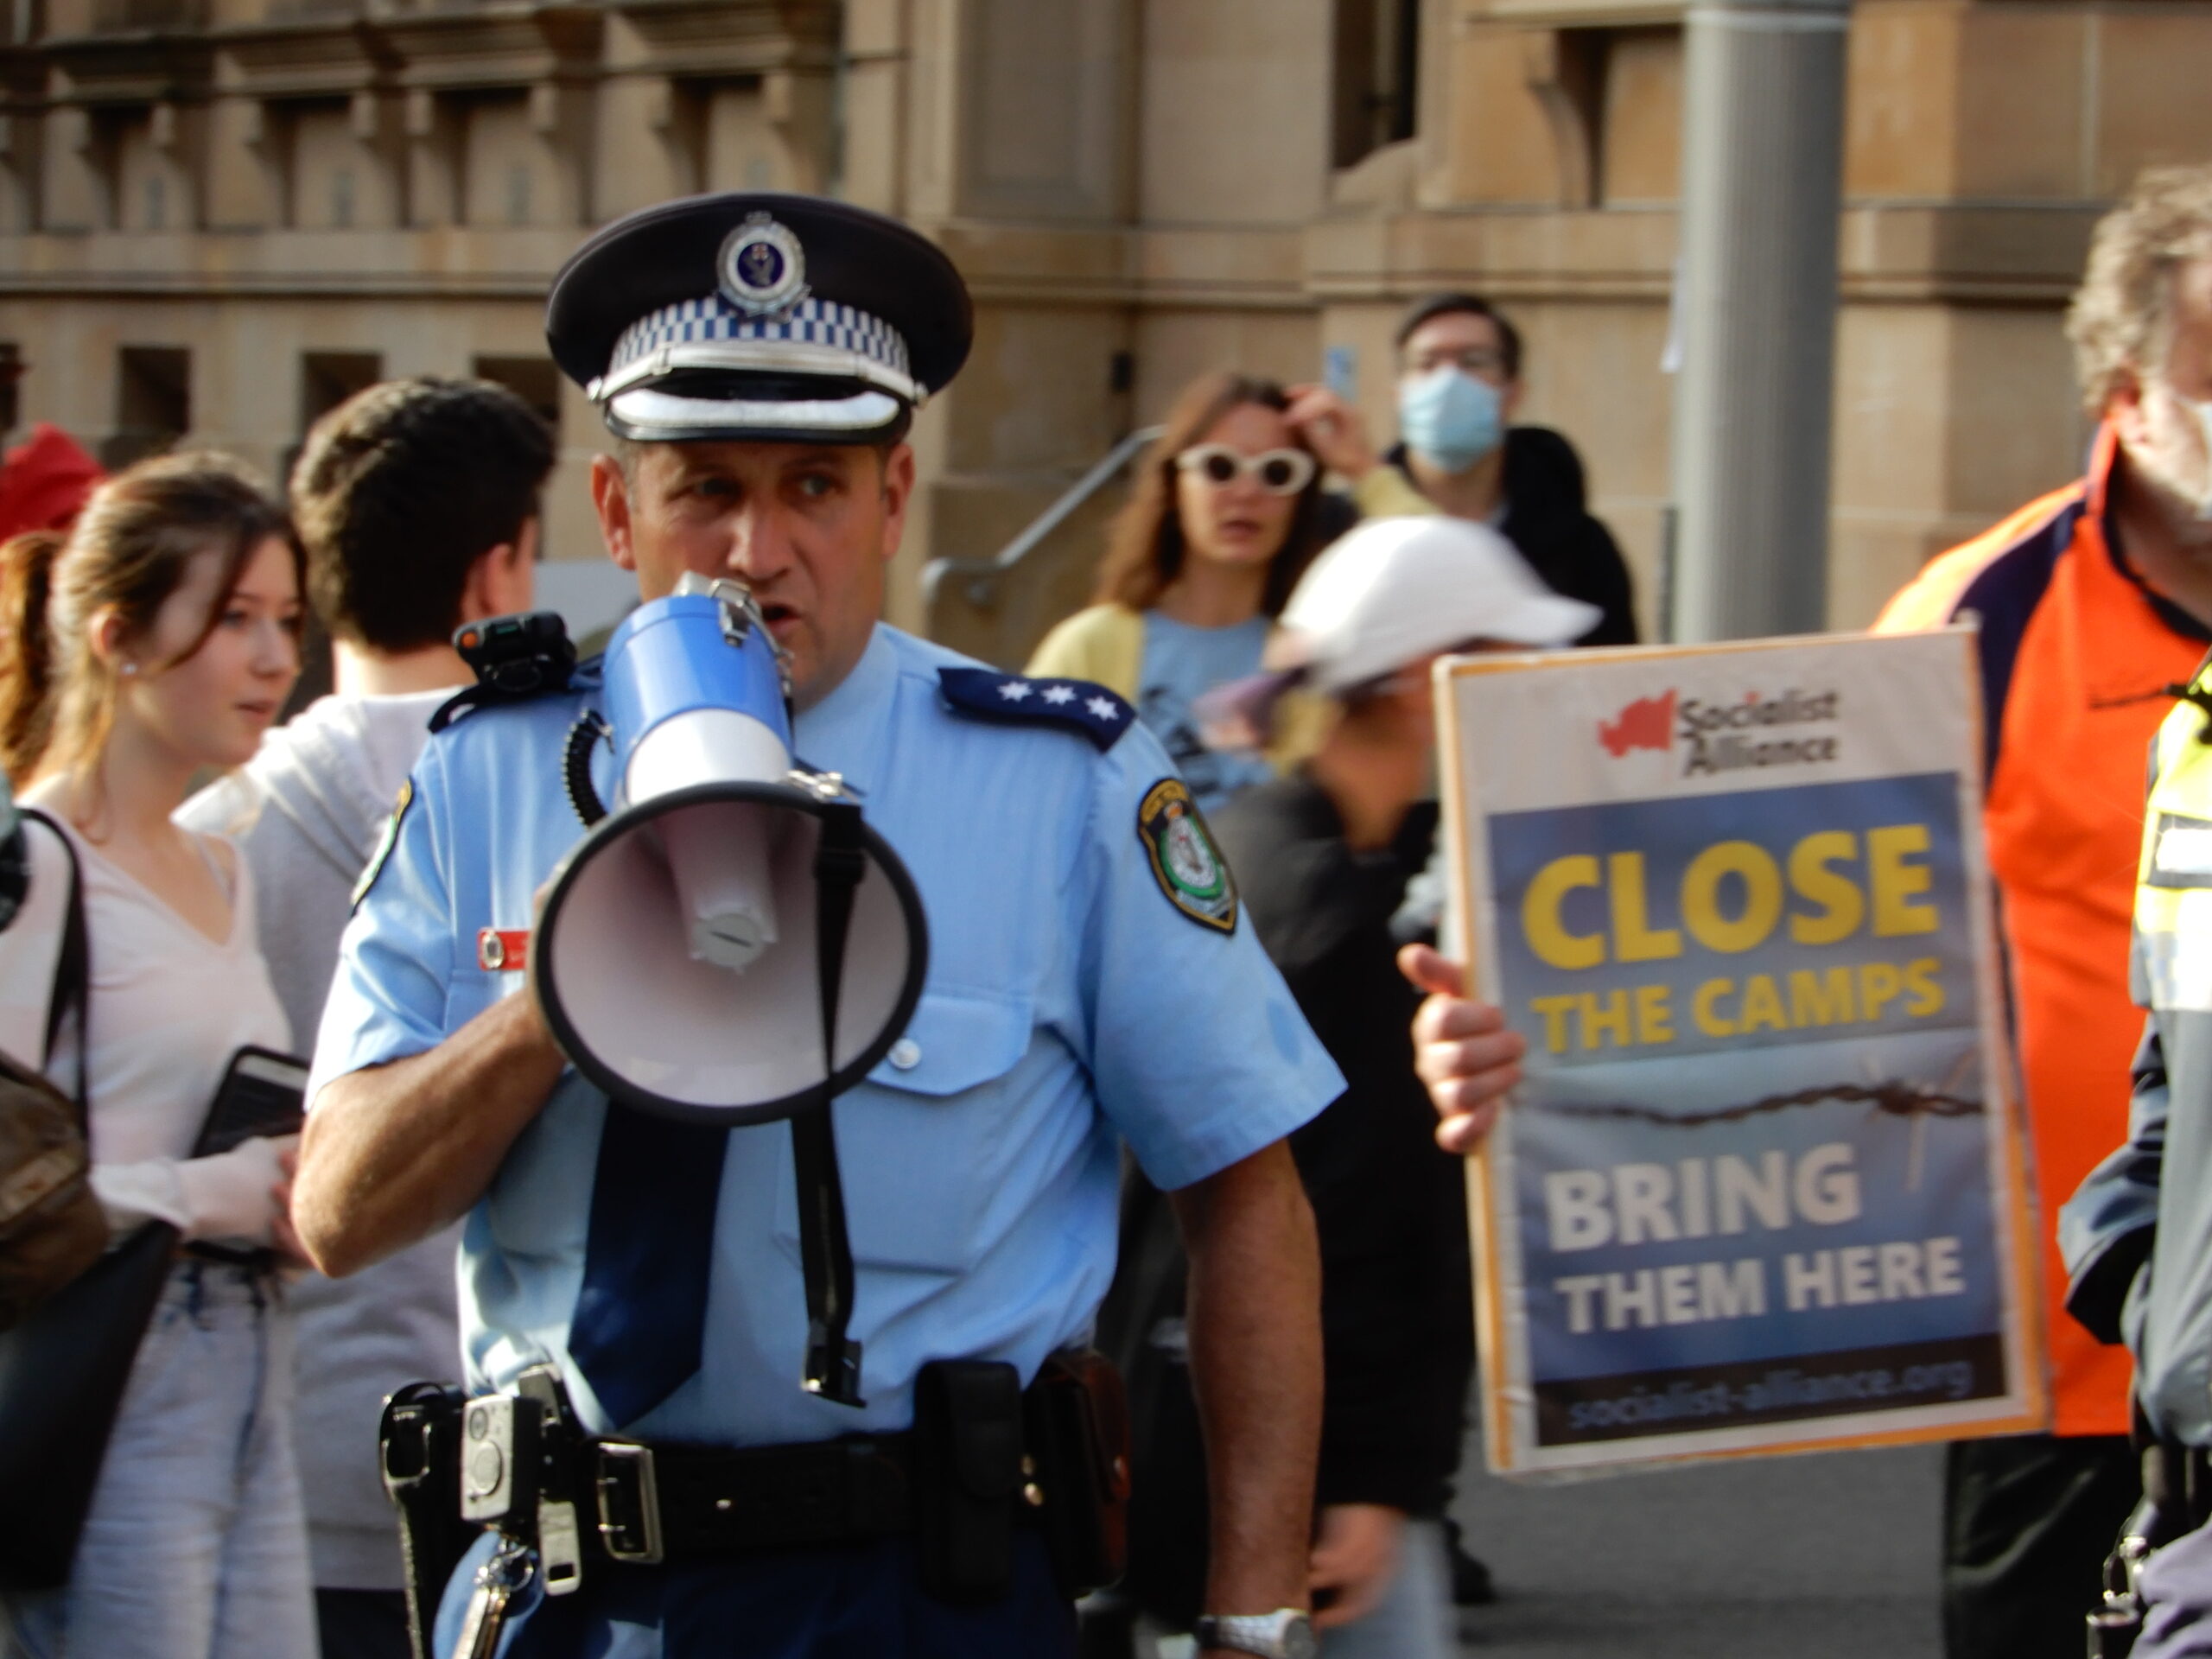 Officer in charge closing down refugee rally in Chinatown on 13 June 2020